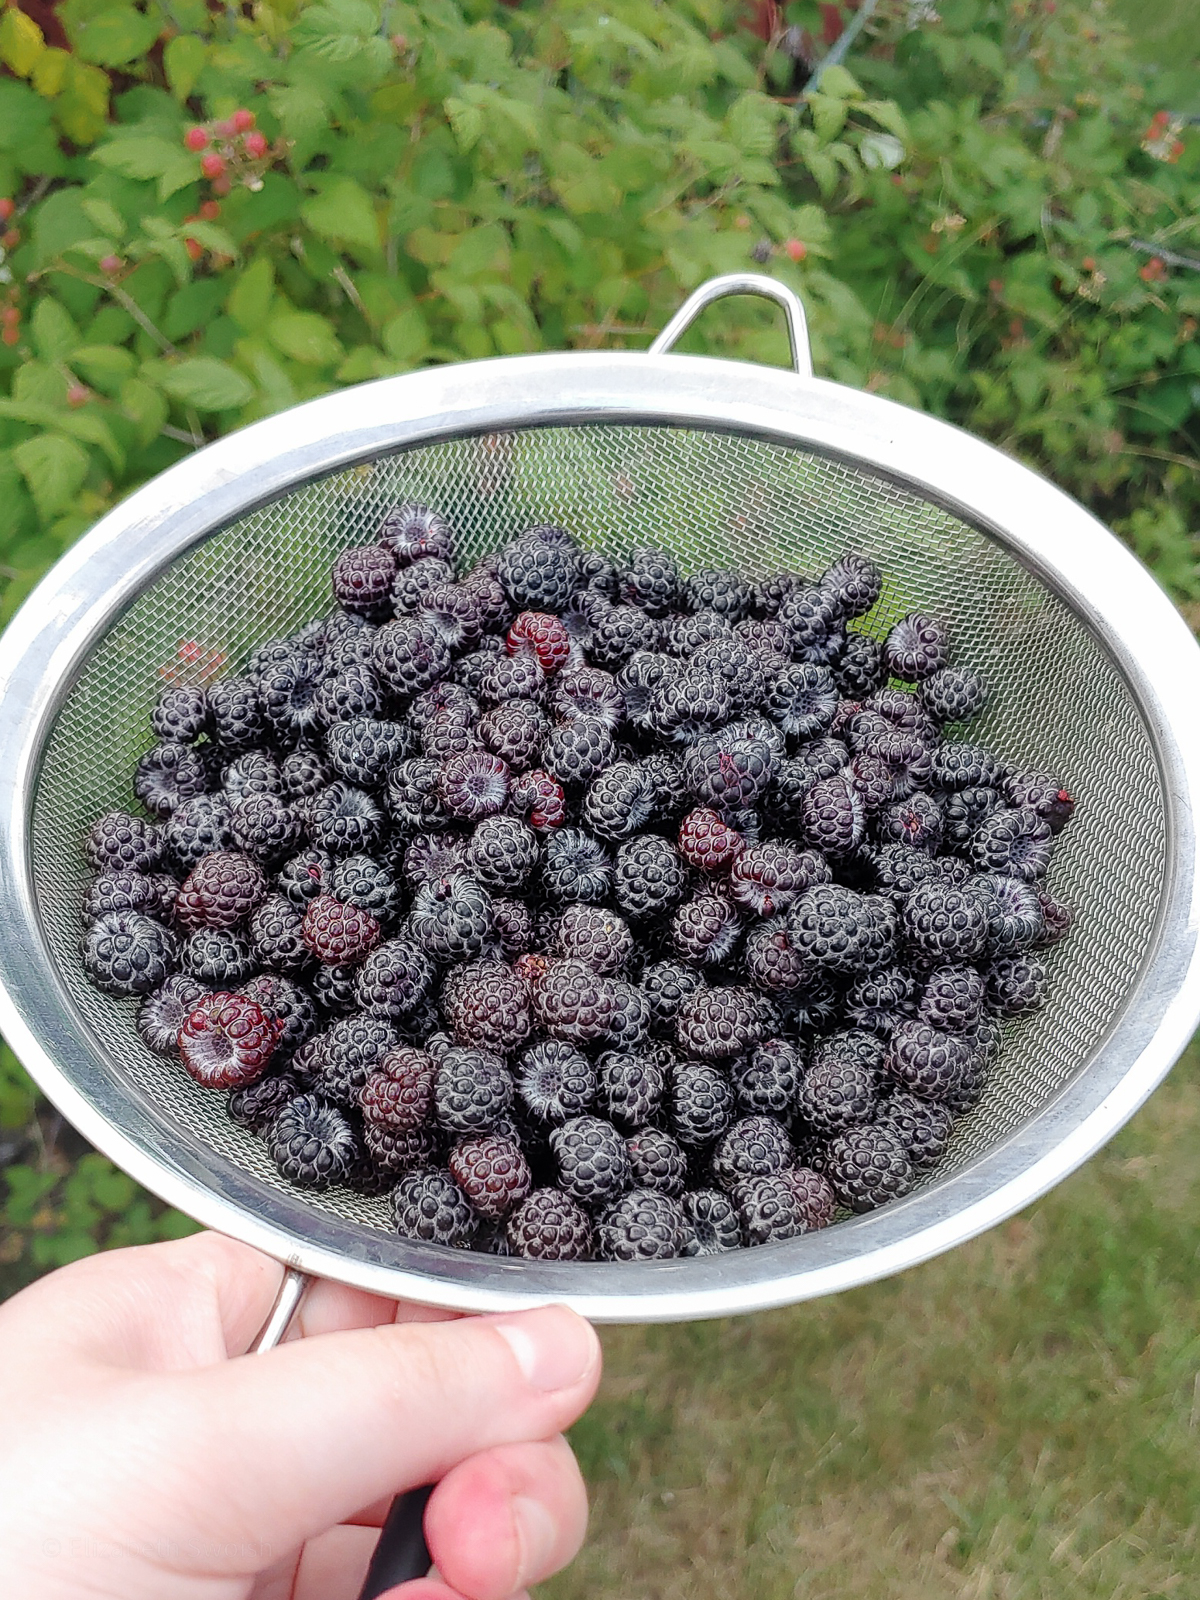 Strainer full of fresh wild blackberries with berry bushes in the background.